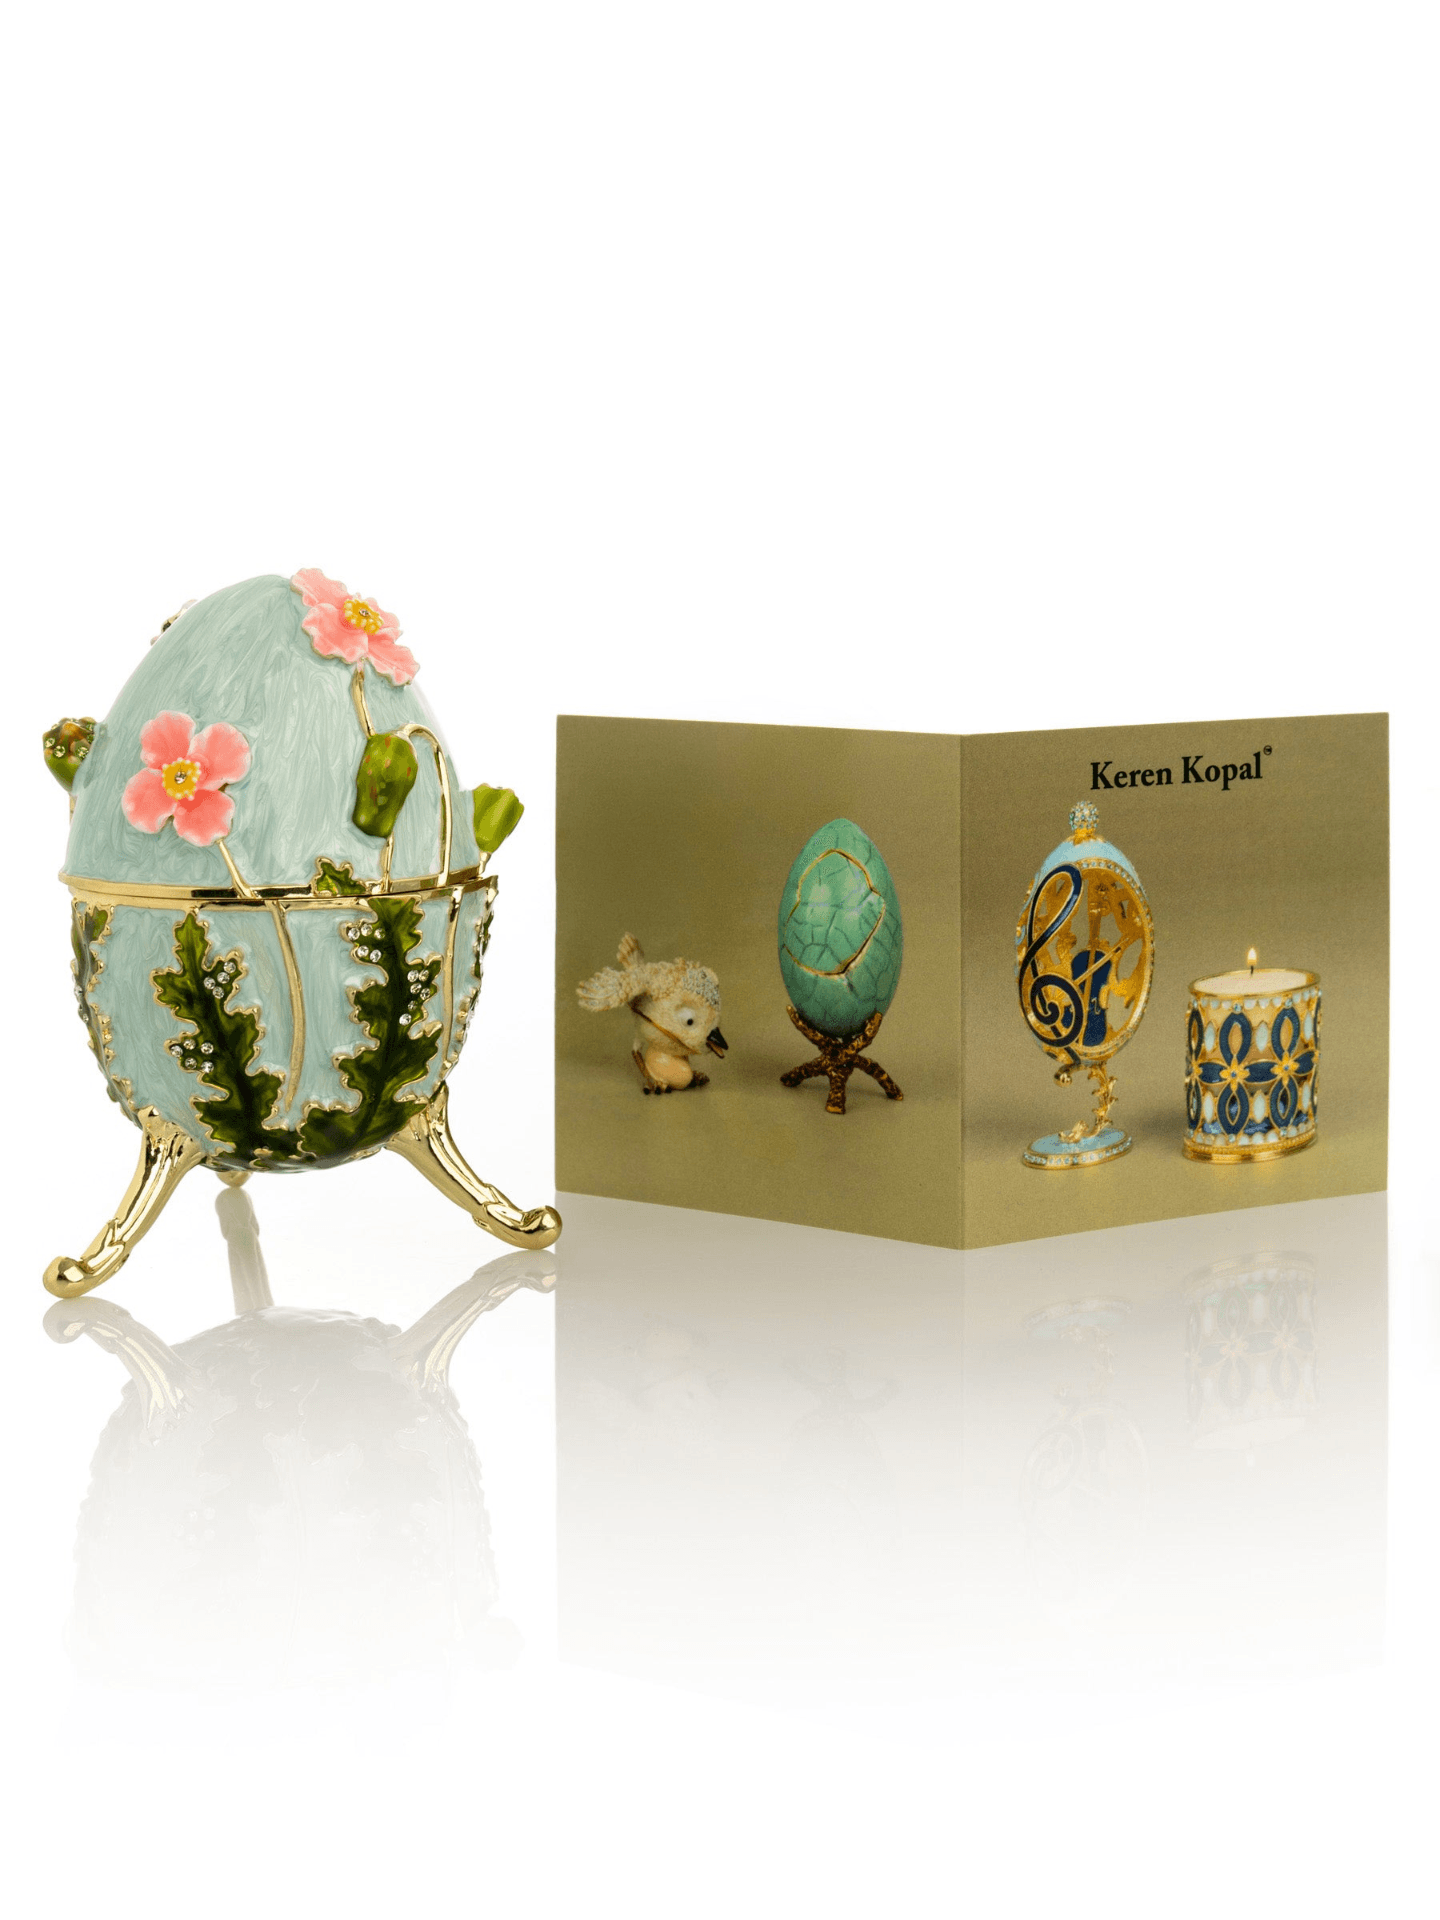 Turquoise Faberge Egg with Flowers  